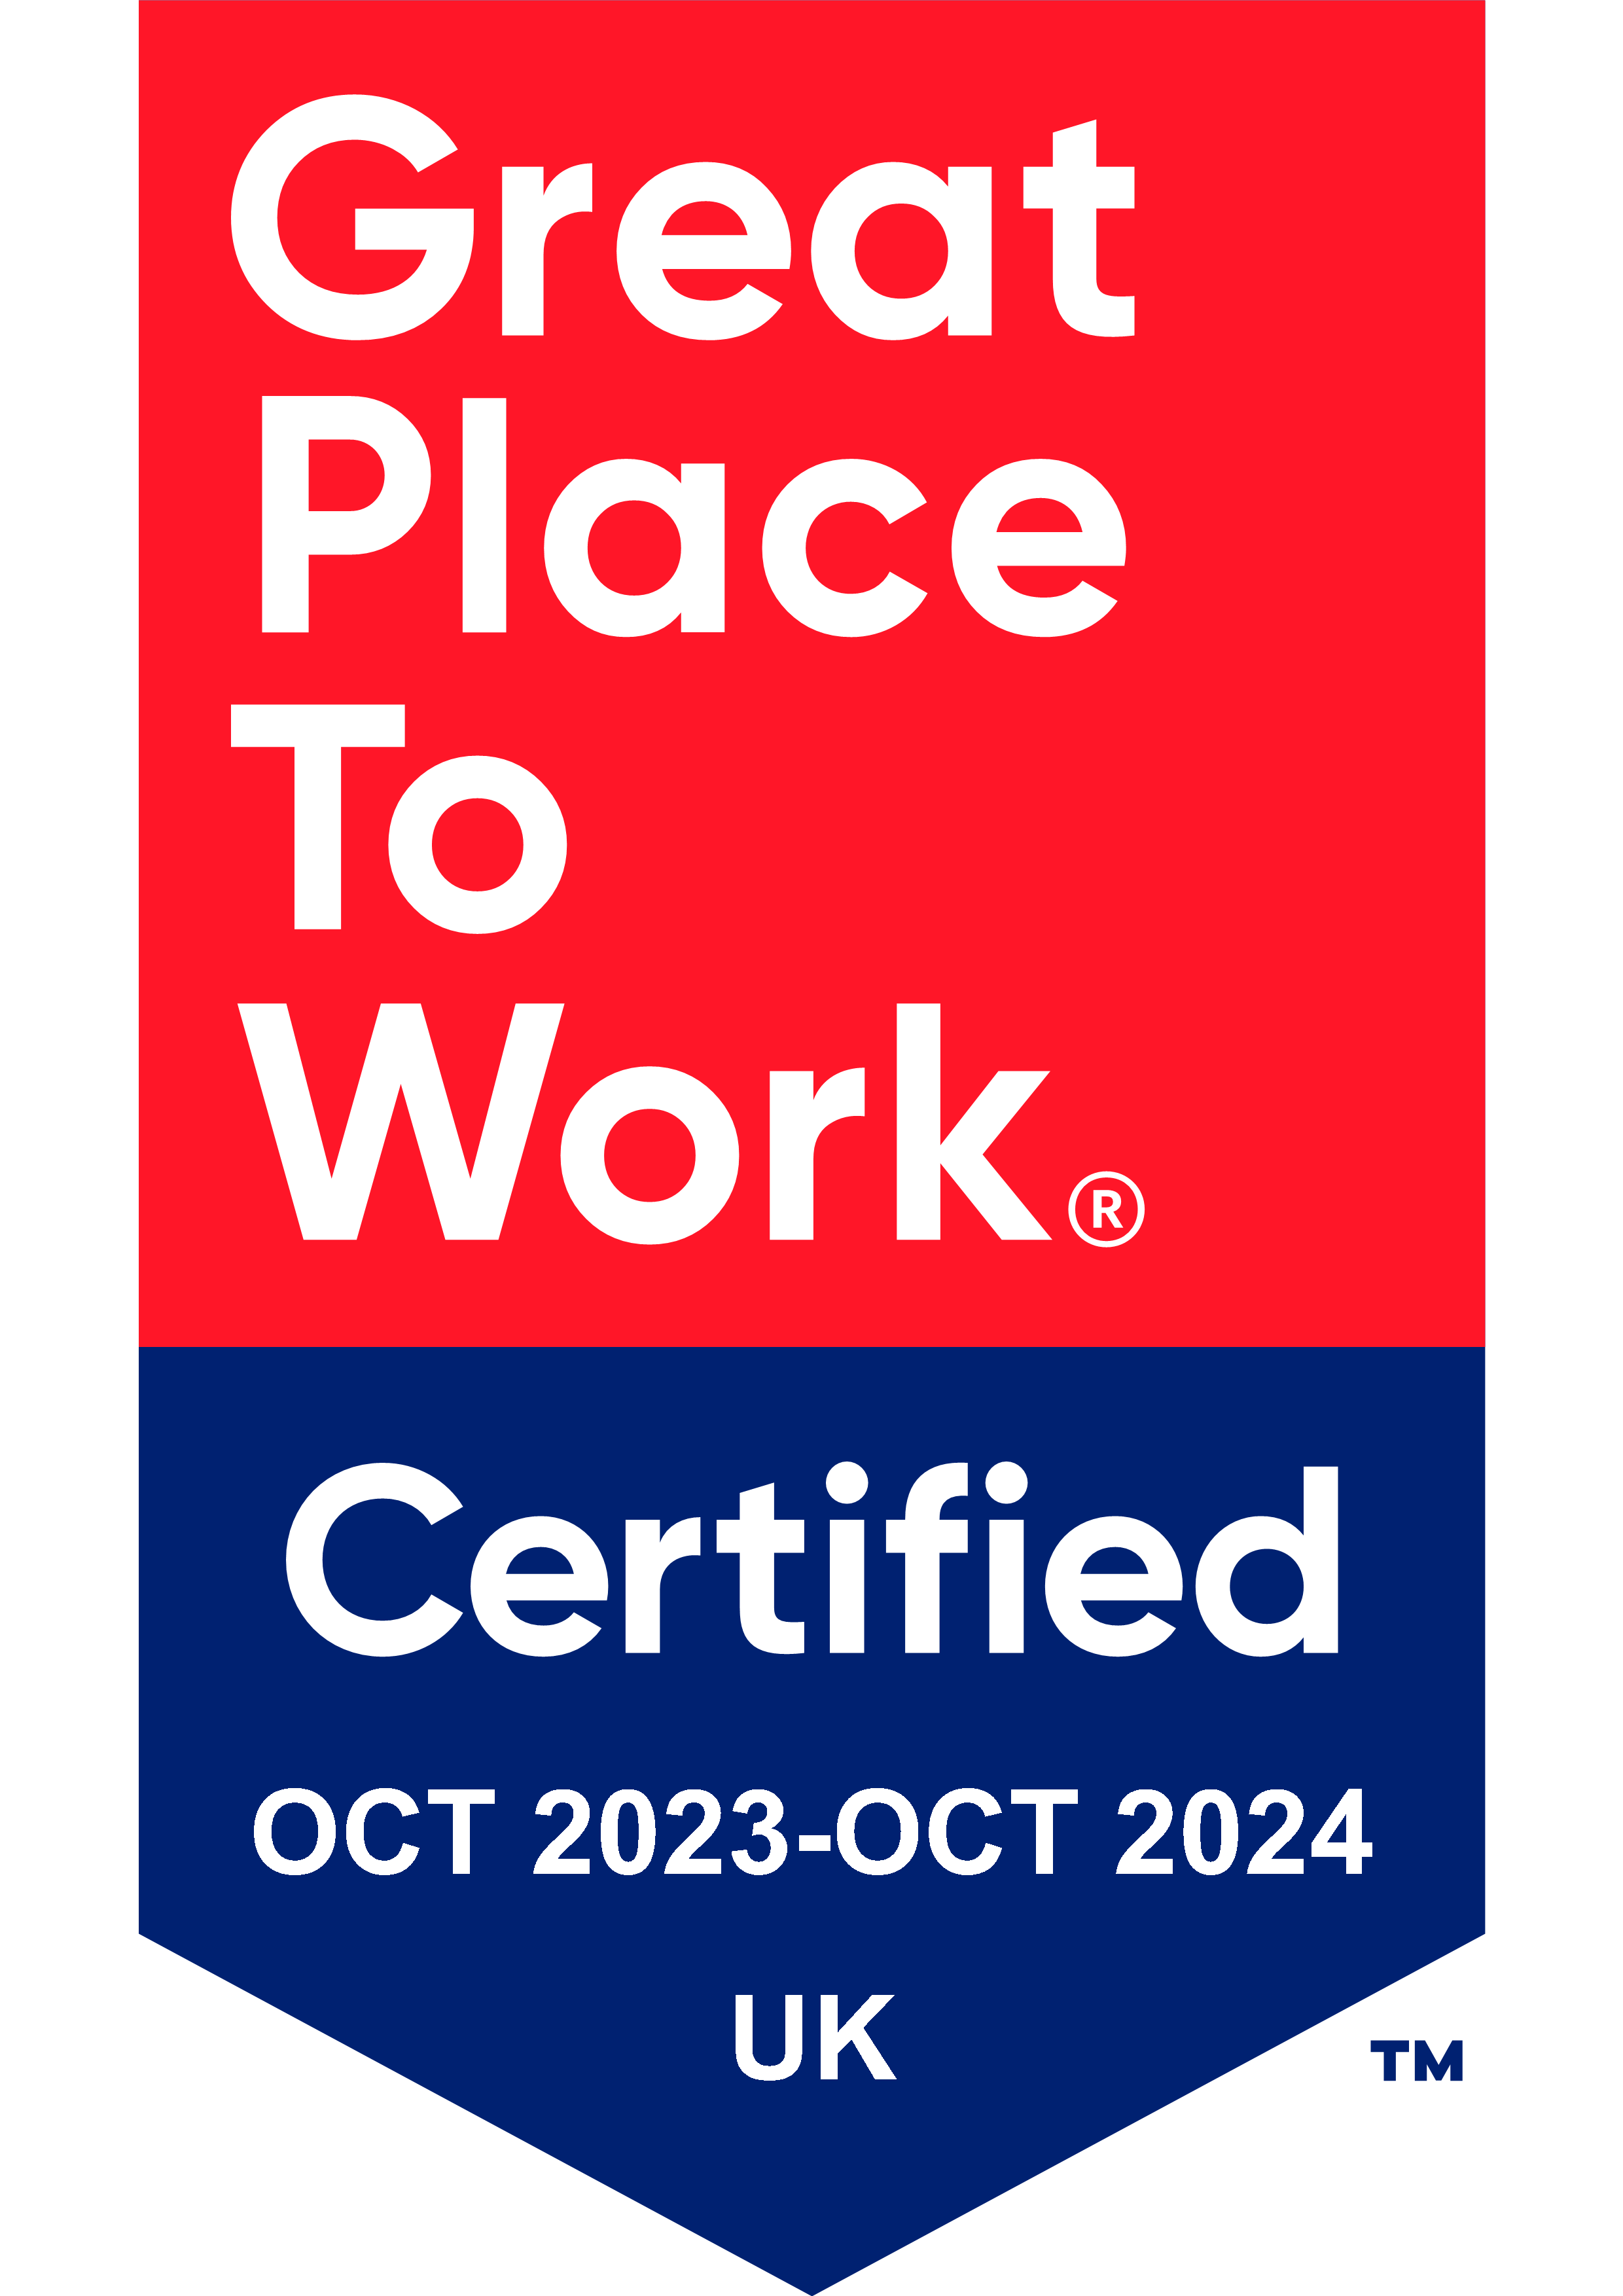 Great Place to Work 2023-24 Certification Banner